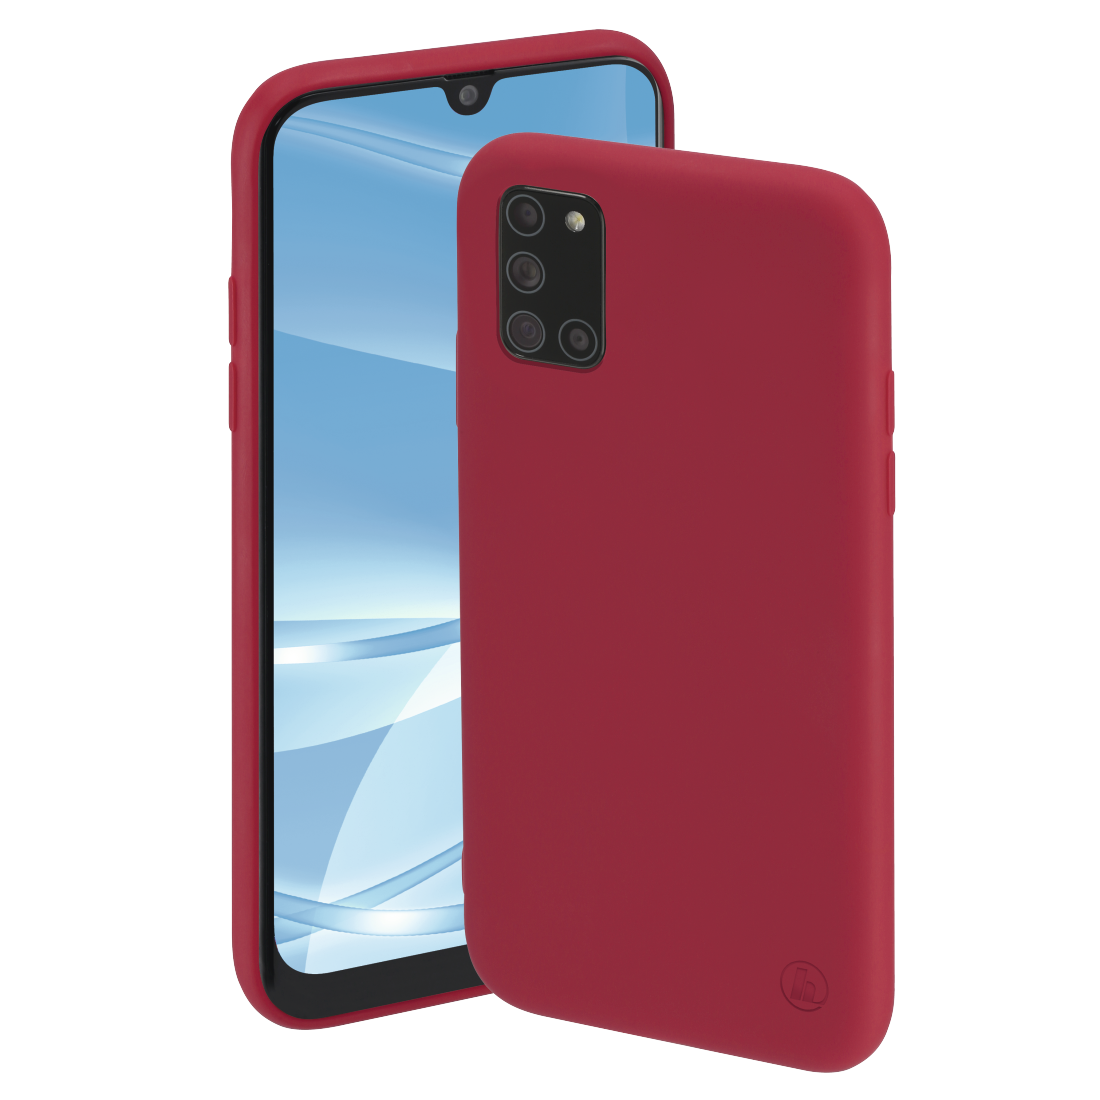 00195301 Hama "Finest Feel" Cover for Samsung Galaxy A31, red